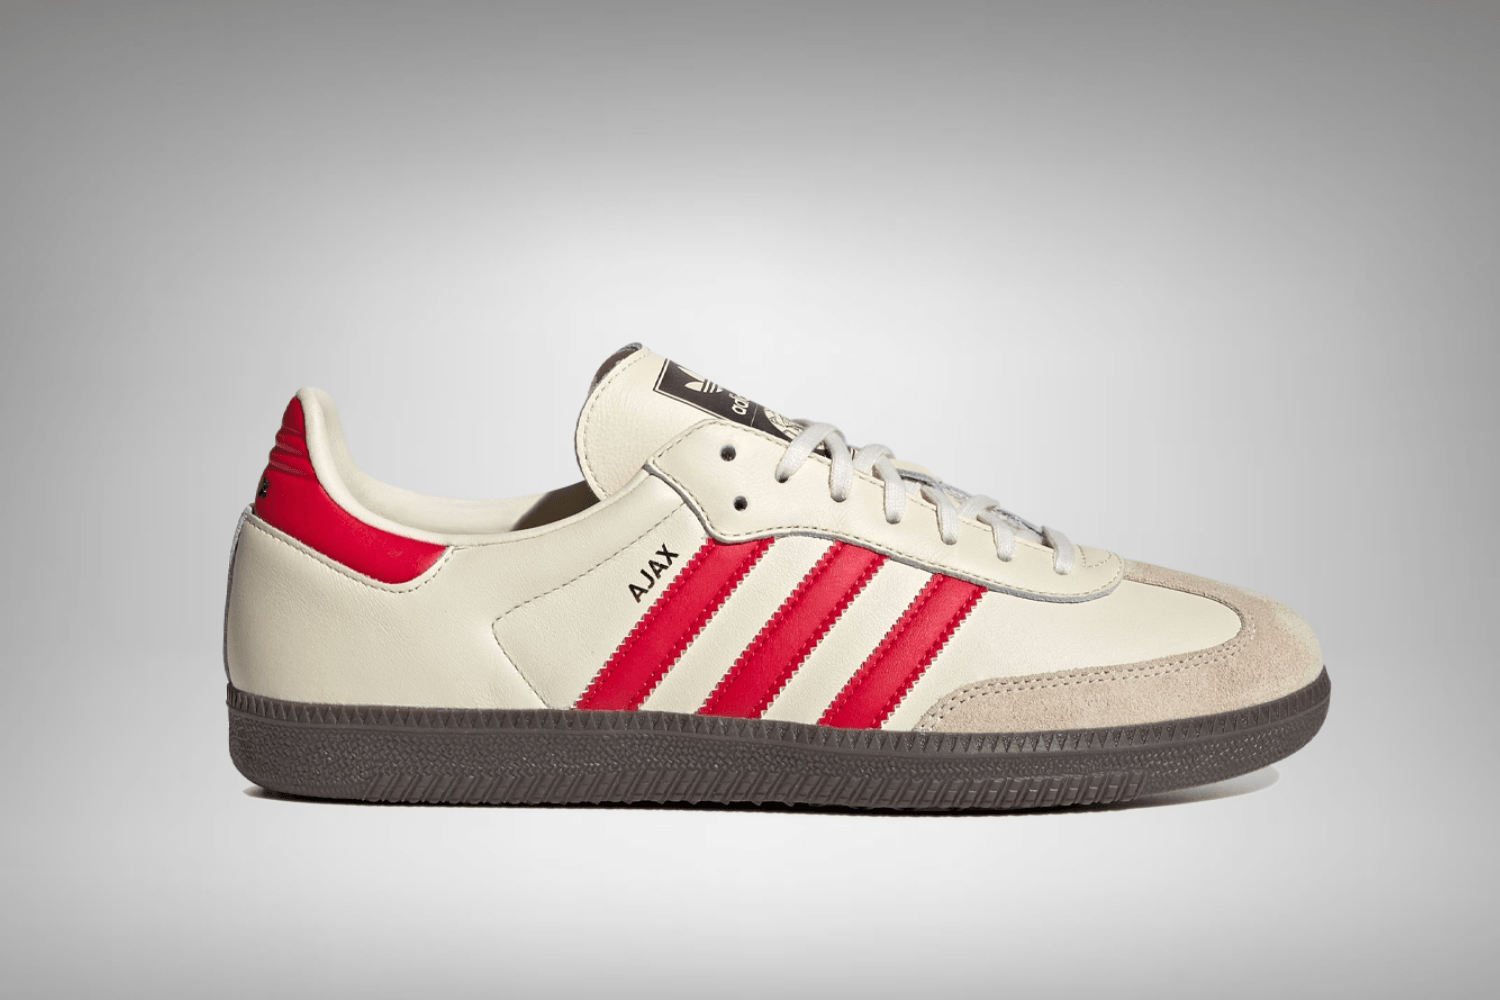 The exclusive adidas Samba OG 'Ajax' is out now